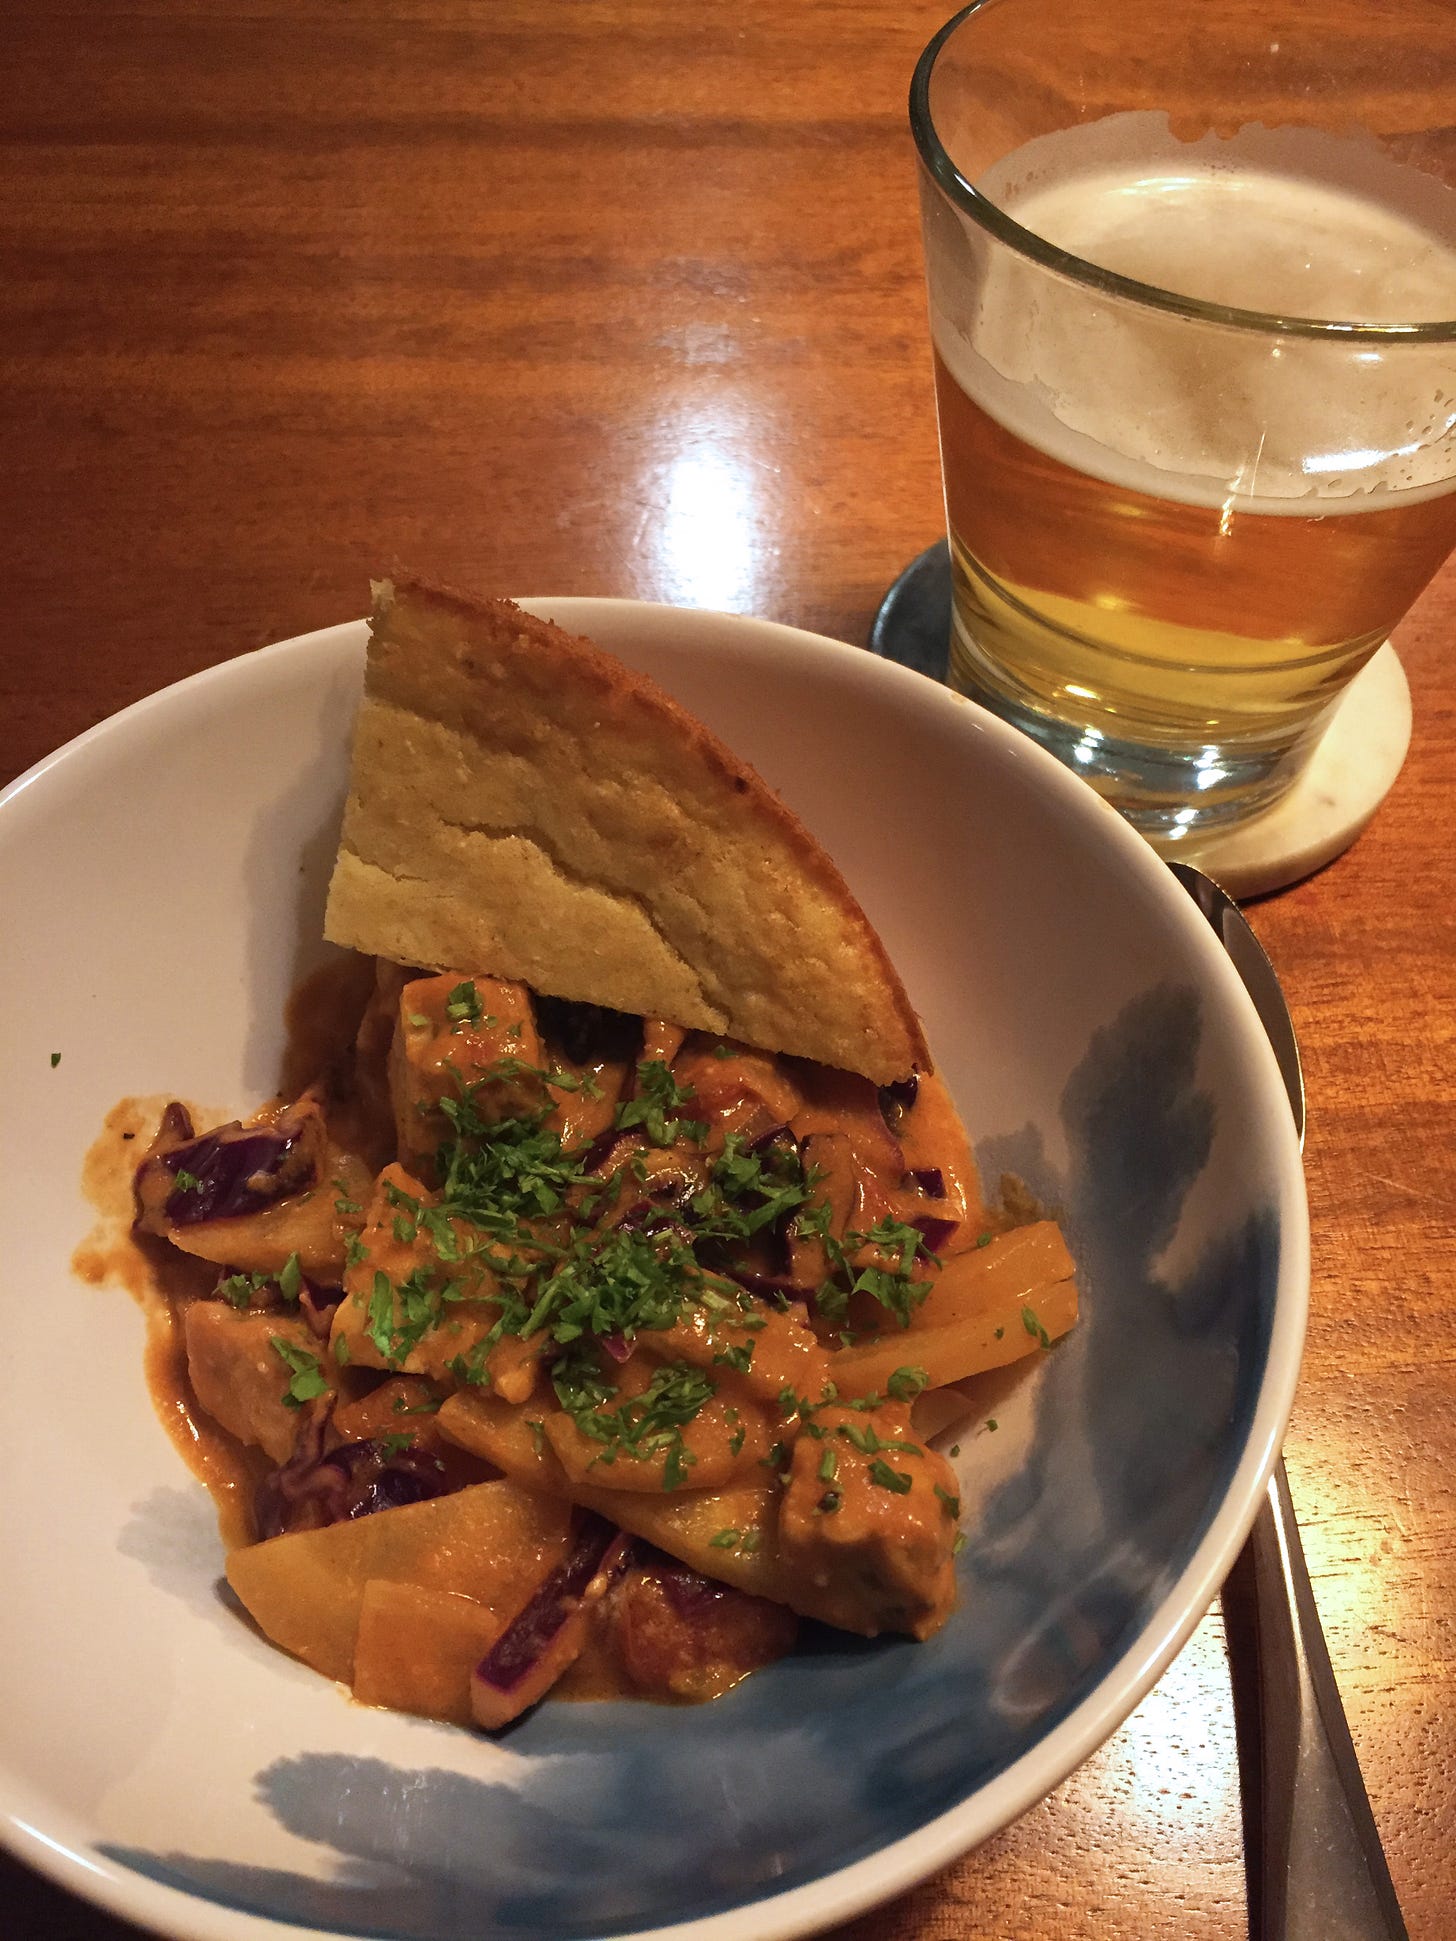 In a white bowl, an orangeish stew with visible pieces of carrot and cabbage is topped with parsley. A wedge of cornbread rests at the side of the bowl. Beside it on a coaster is a glass of lager.